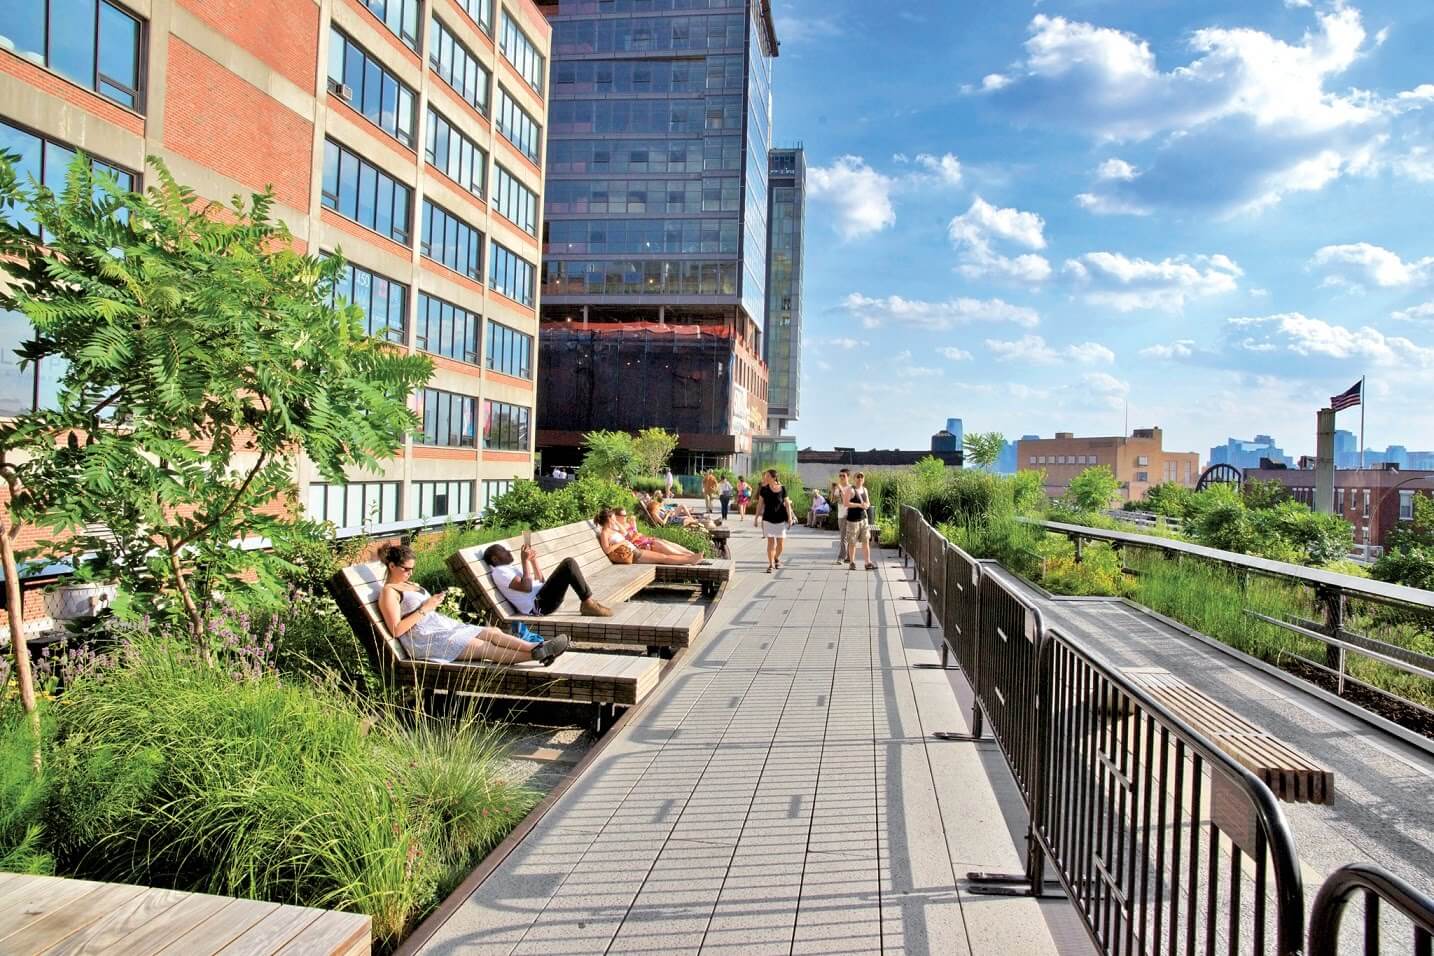 The High Line: romantic spots in New York